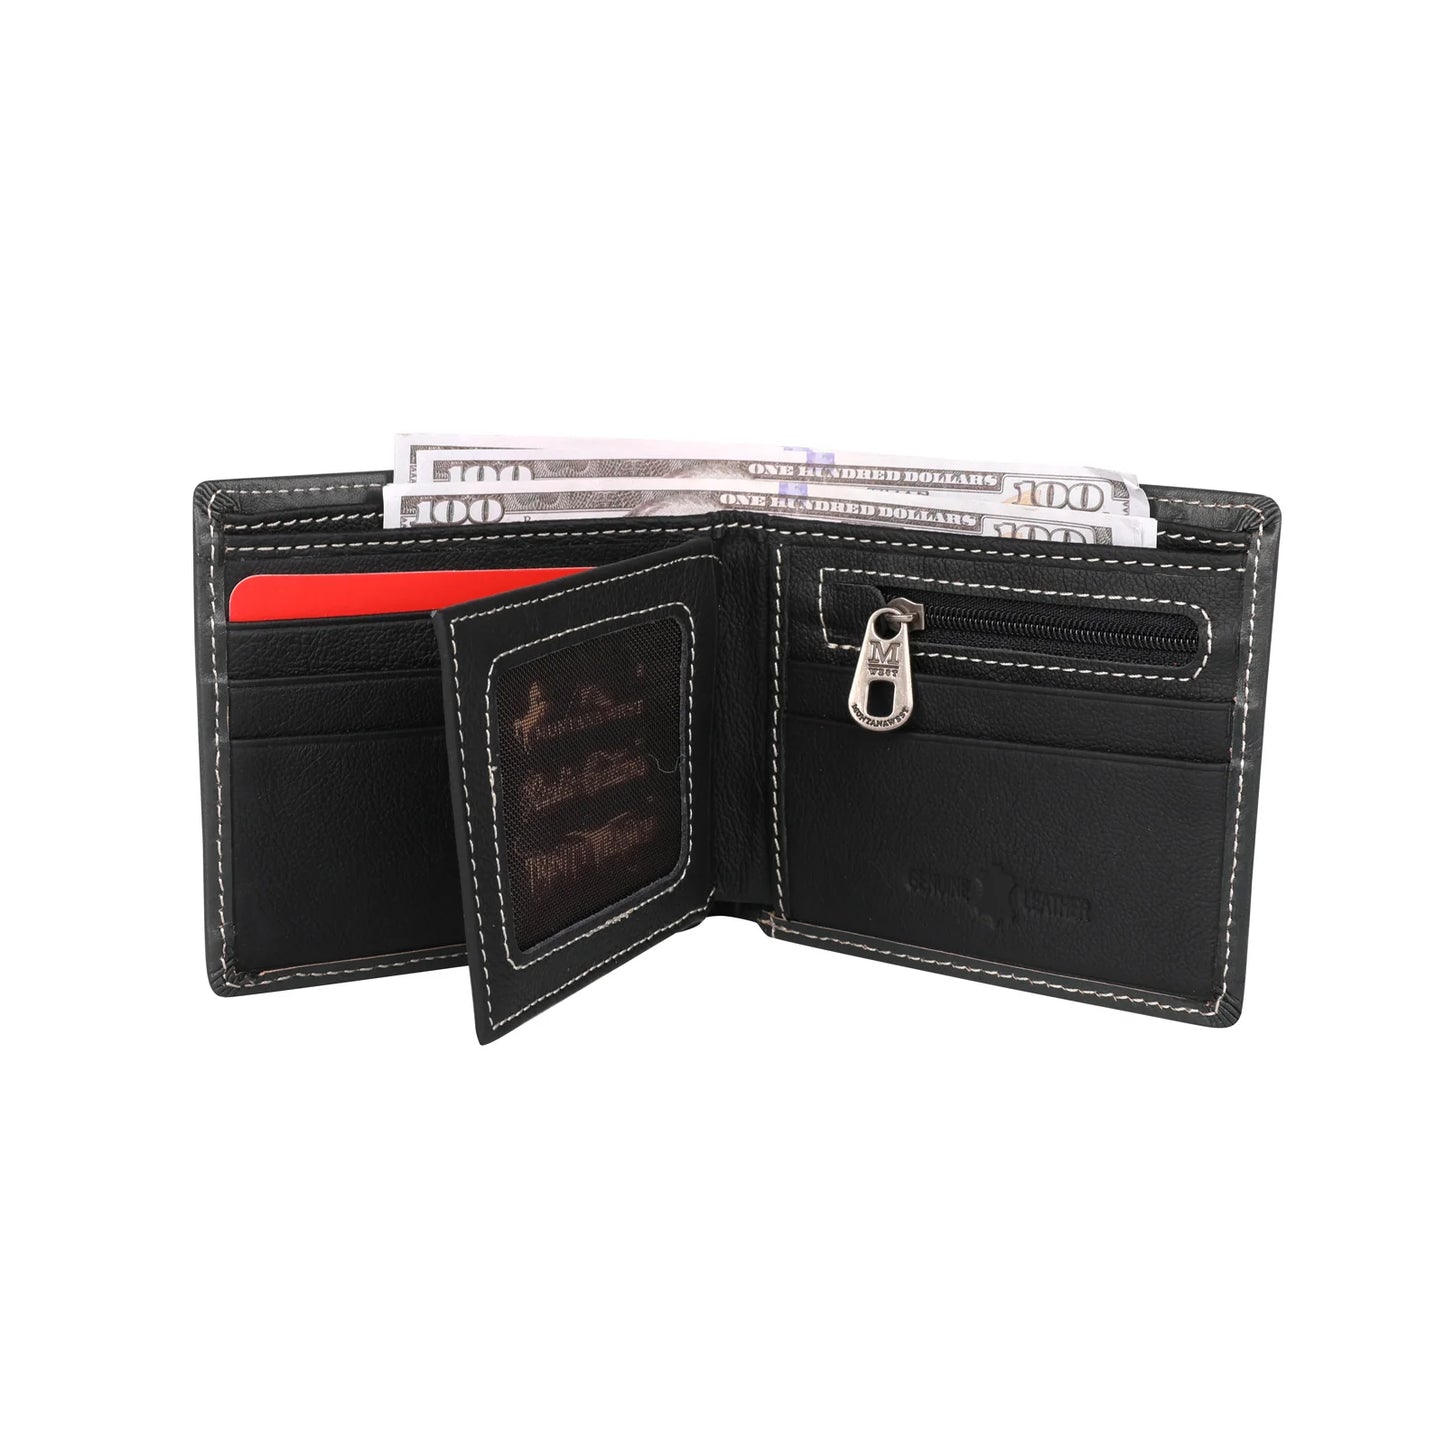 Montana West Genuine Tooled Leather Collection Mens Wallet - Black - MWSW001BK